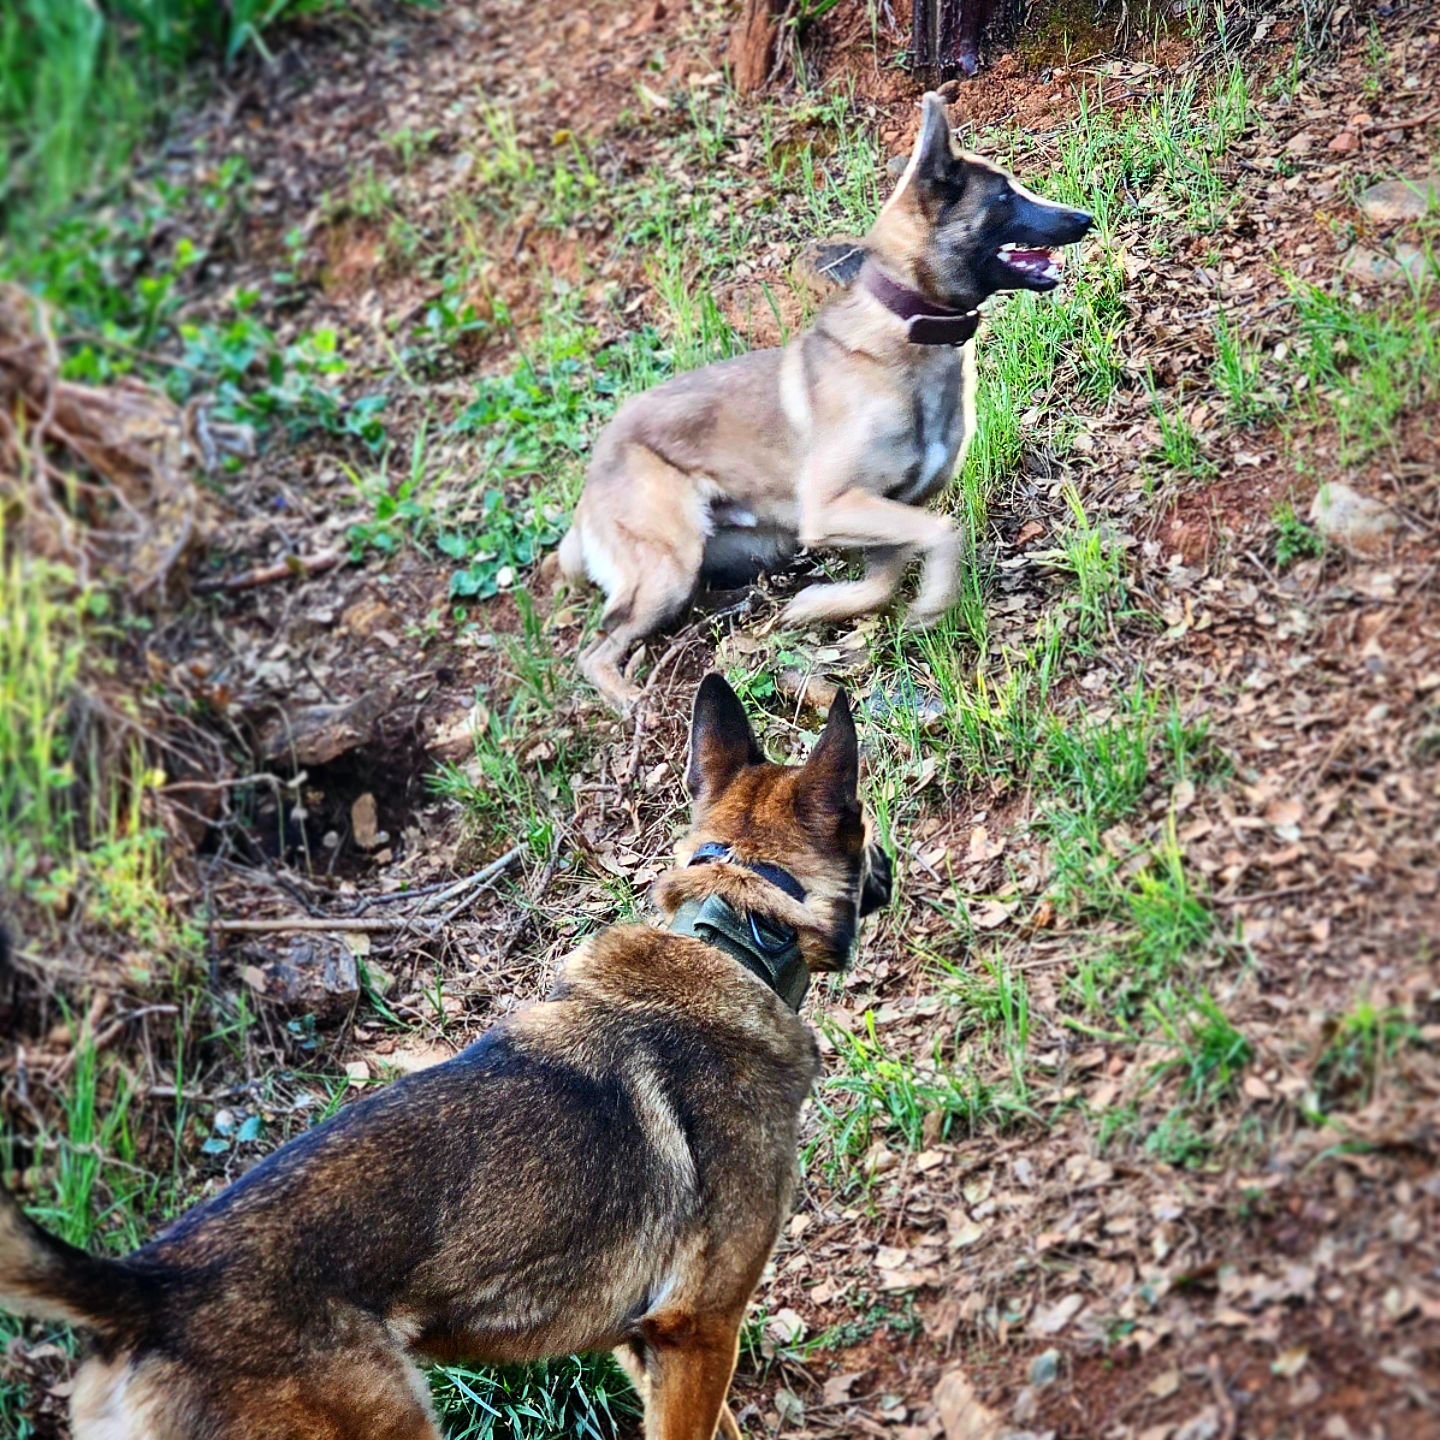 A couple of Malinois enjoying the #backyardbliss at JoBu!
Gaara always loves it when his breed gets to come for boarding.
He's a half working line GSD x Belgian Malinois cross breed 👍

Find yourself in need of some training for your pooch? At Jobu w